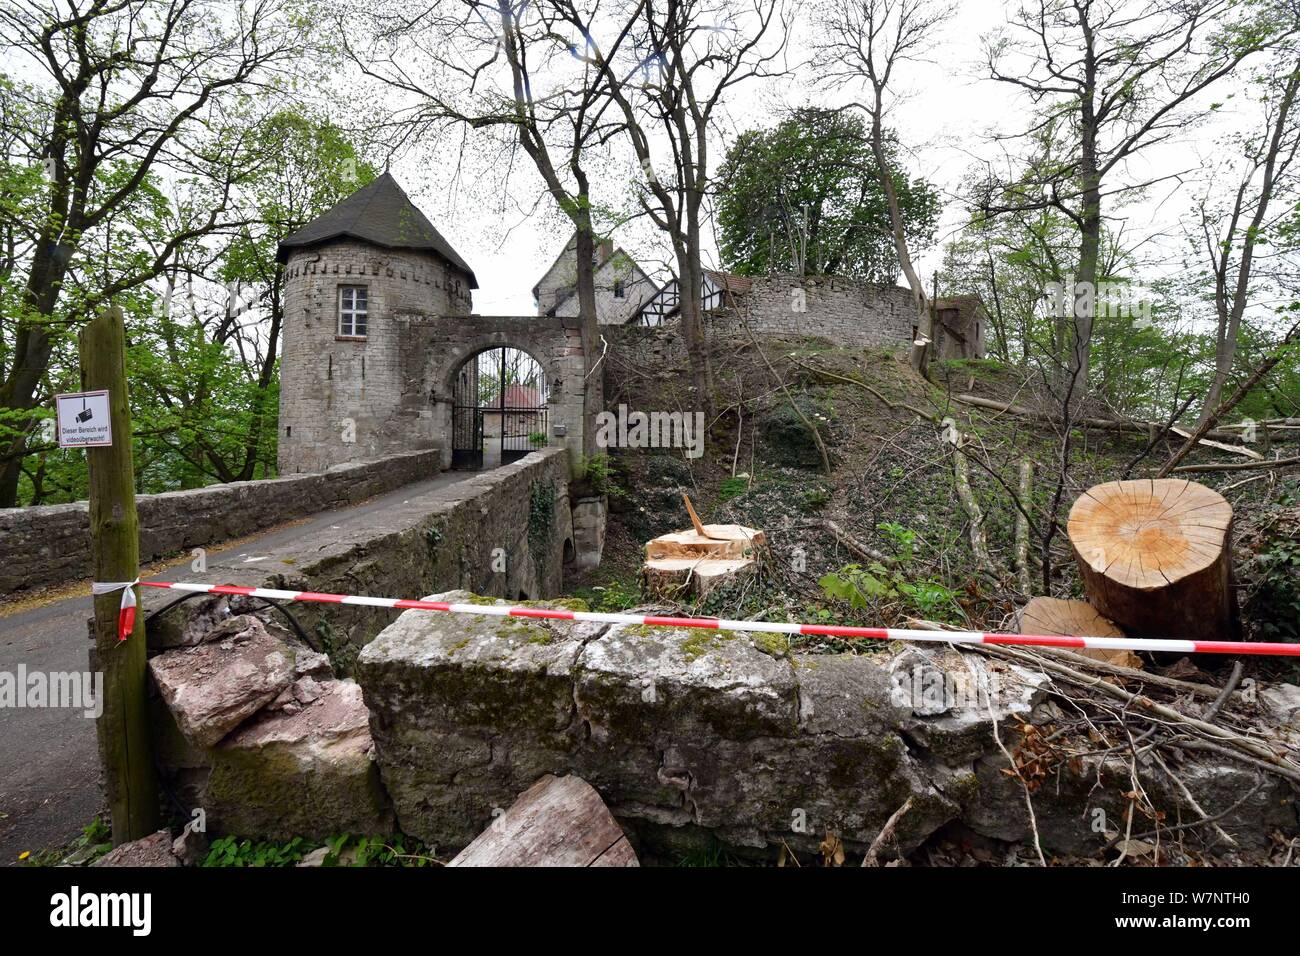 Wachstedt, Germany. 26th Apr, 2019. The 800-year-old Gleichenstein Castle in Eichsfeld in northern Thuringia. A young man with roots in Eastern Thuringia acquired the badly damaged castle last year in order to save and revive it. He's planning a place to celebrate and a utility hemp foam factory. A small museum is also to be built. Credit: Martin Schutt/dpa-Zentralbild/ZB/dpa/Alamy Live News Stock Photo